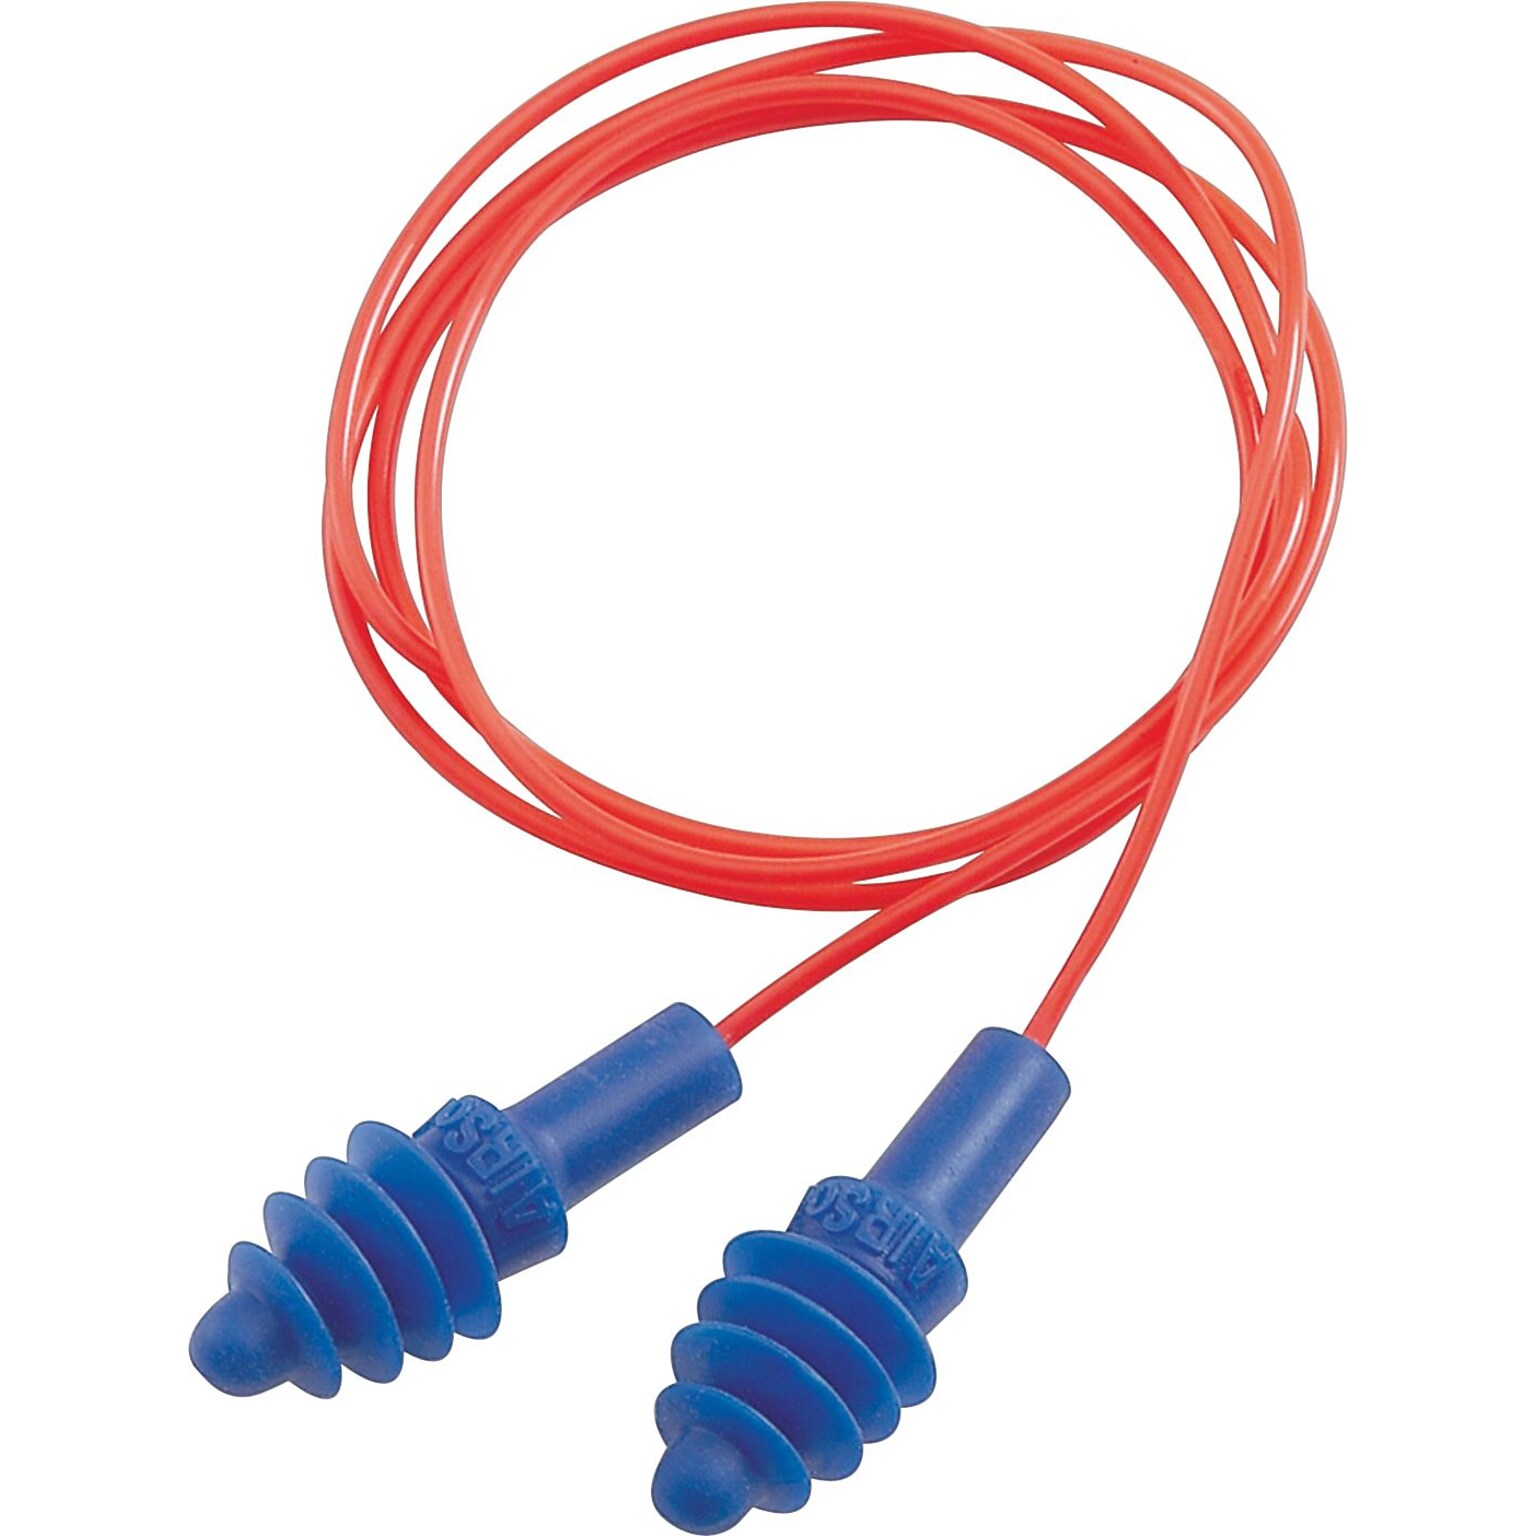 Howard Leight® AirSoft® Red Poly Cord Reusable Earplugs, Blue, 27 dB, 50/BX (AS-1)